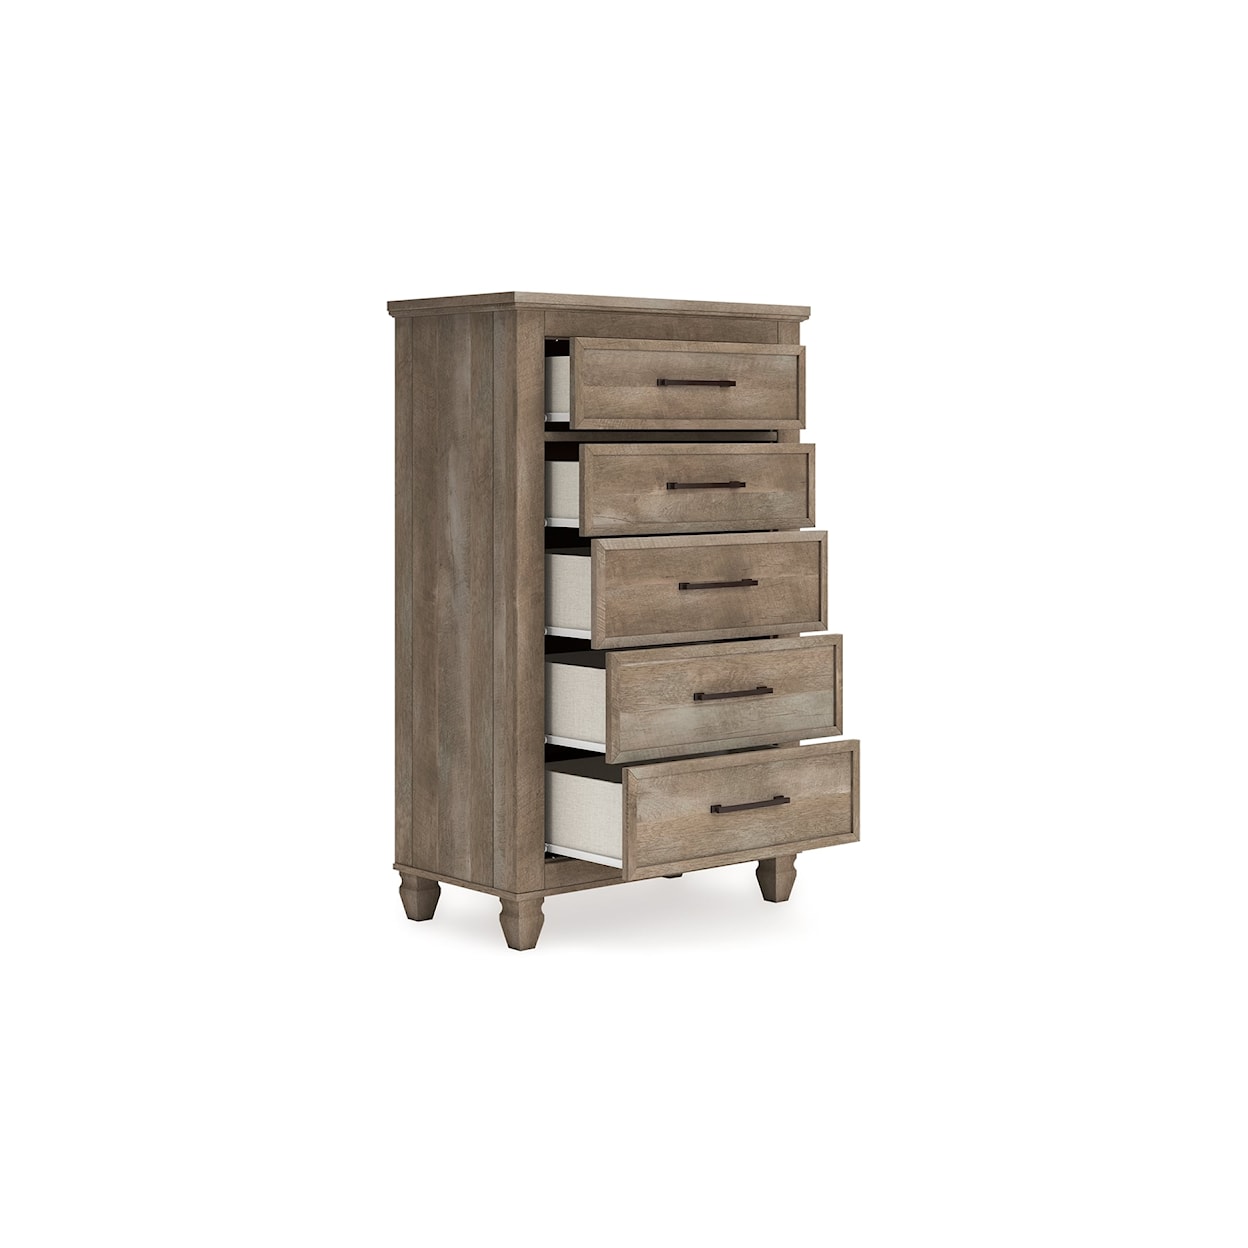 Signature Design by Ashley Furniture Yarbeck Bedroom Chest